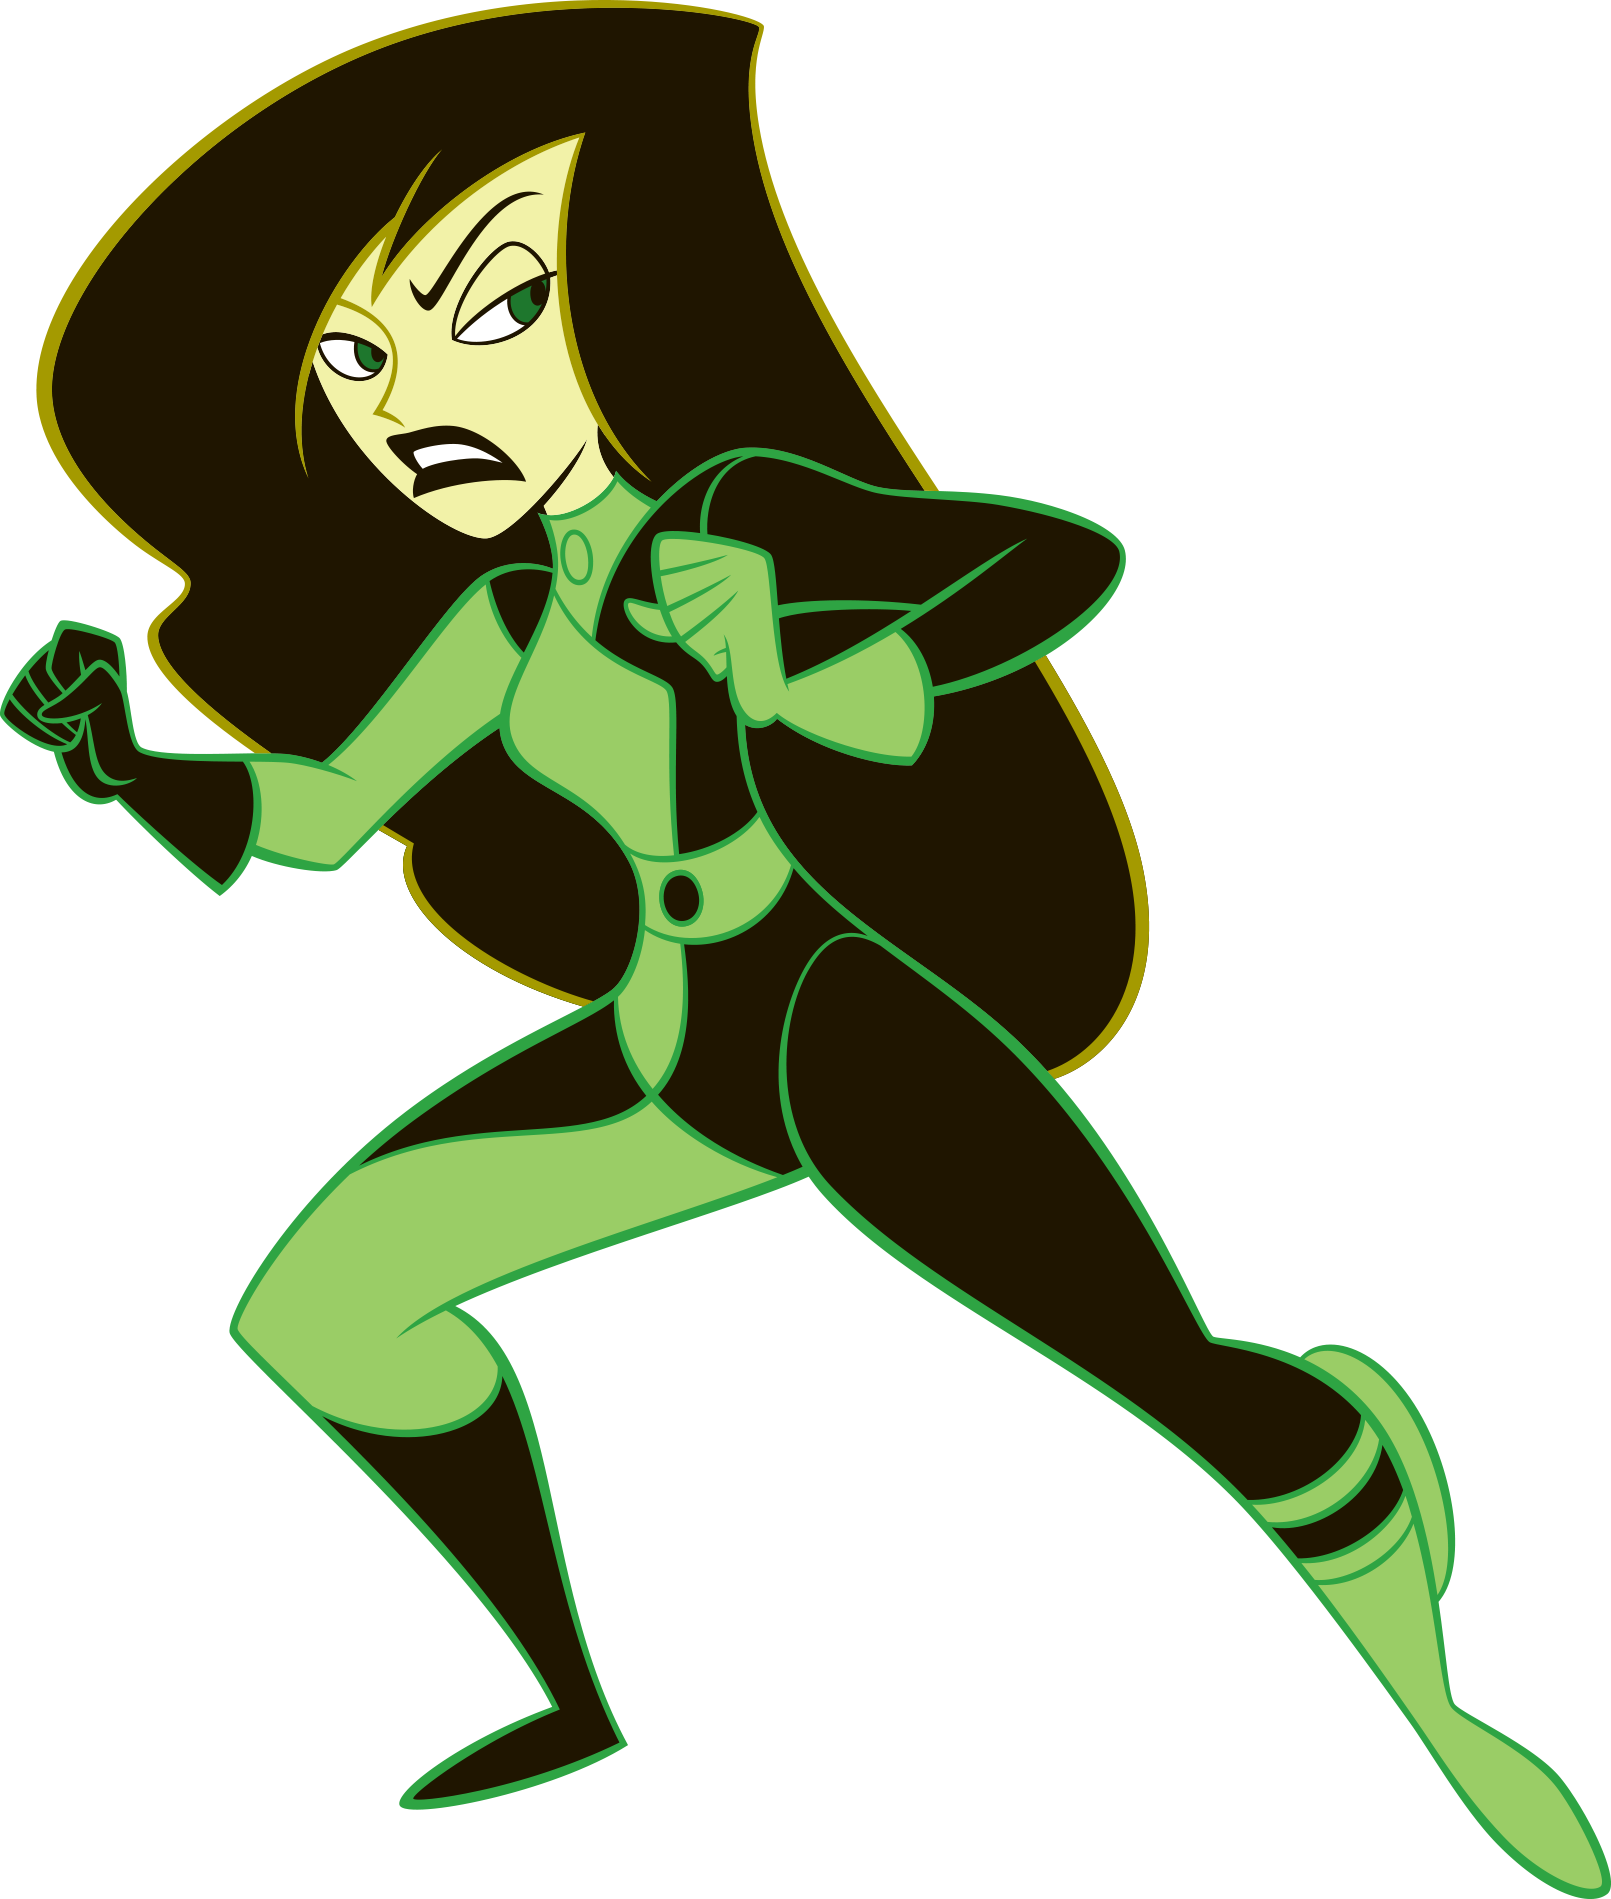 Shego - Live Action Kim Possible Movie (1611x1899)